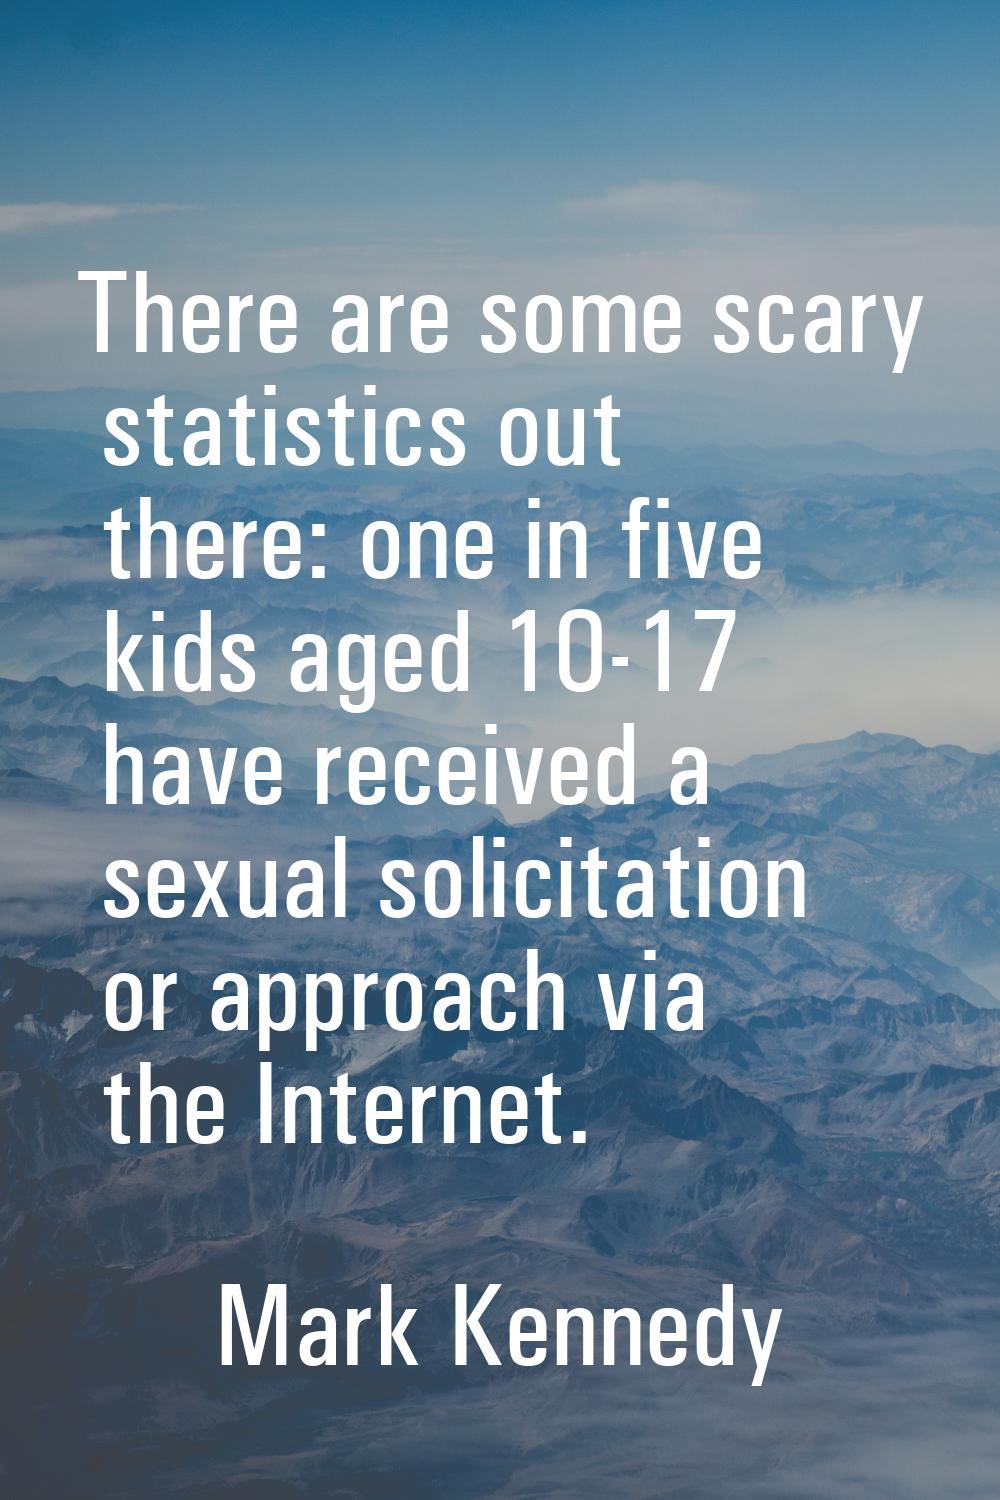 There are some scary statistics out there: one in five kids aged 10-17 have received a sexual solic